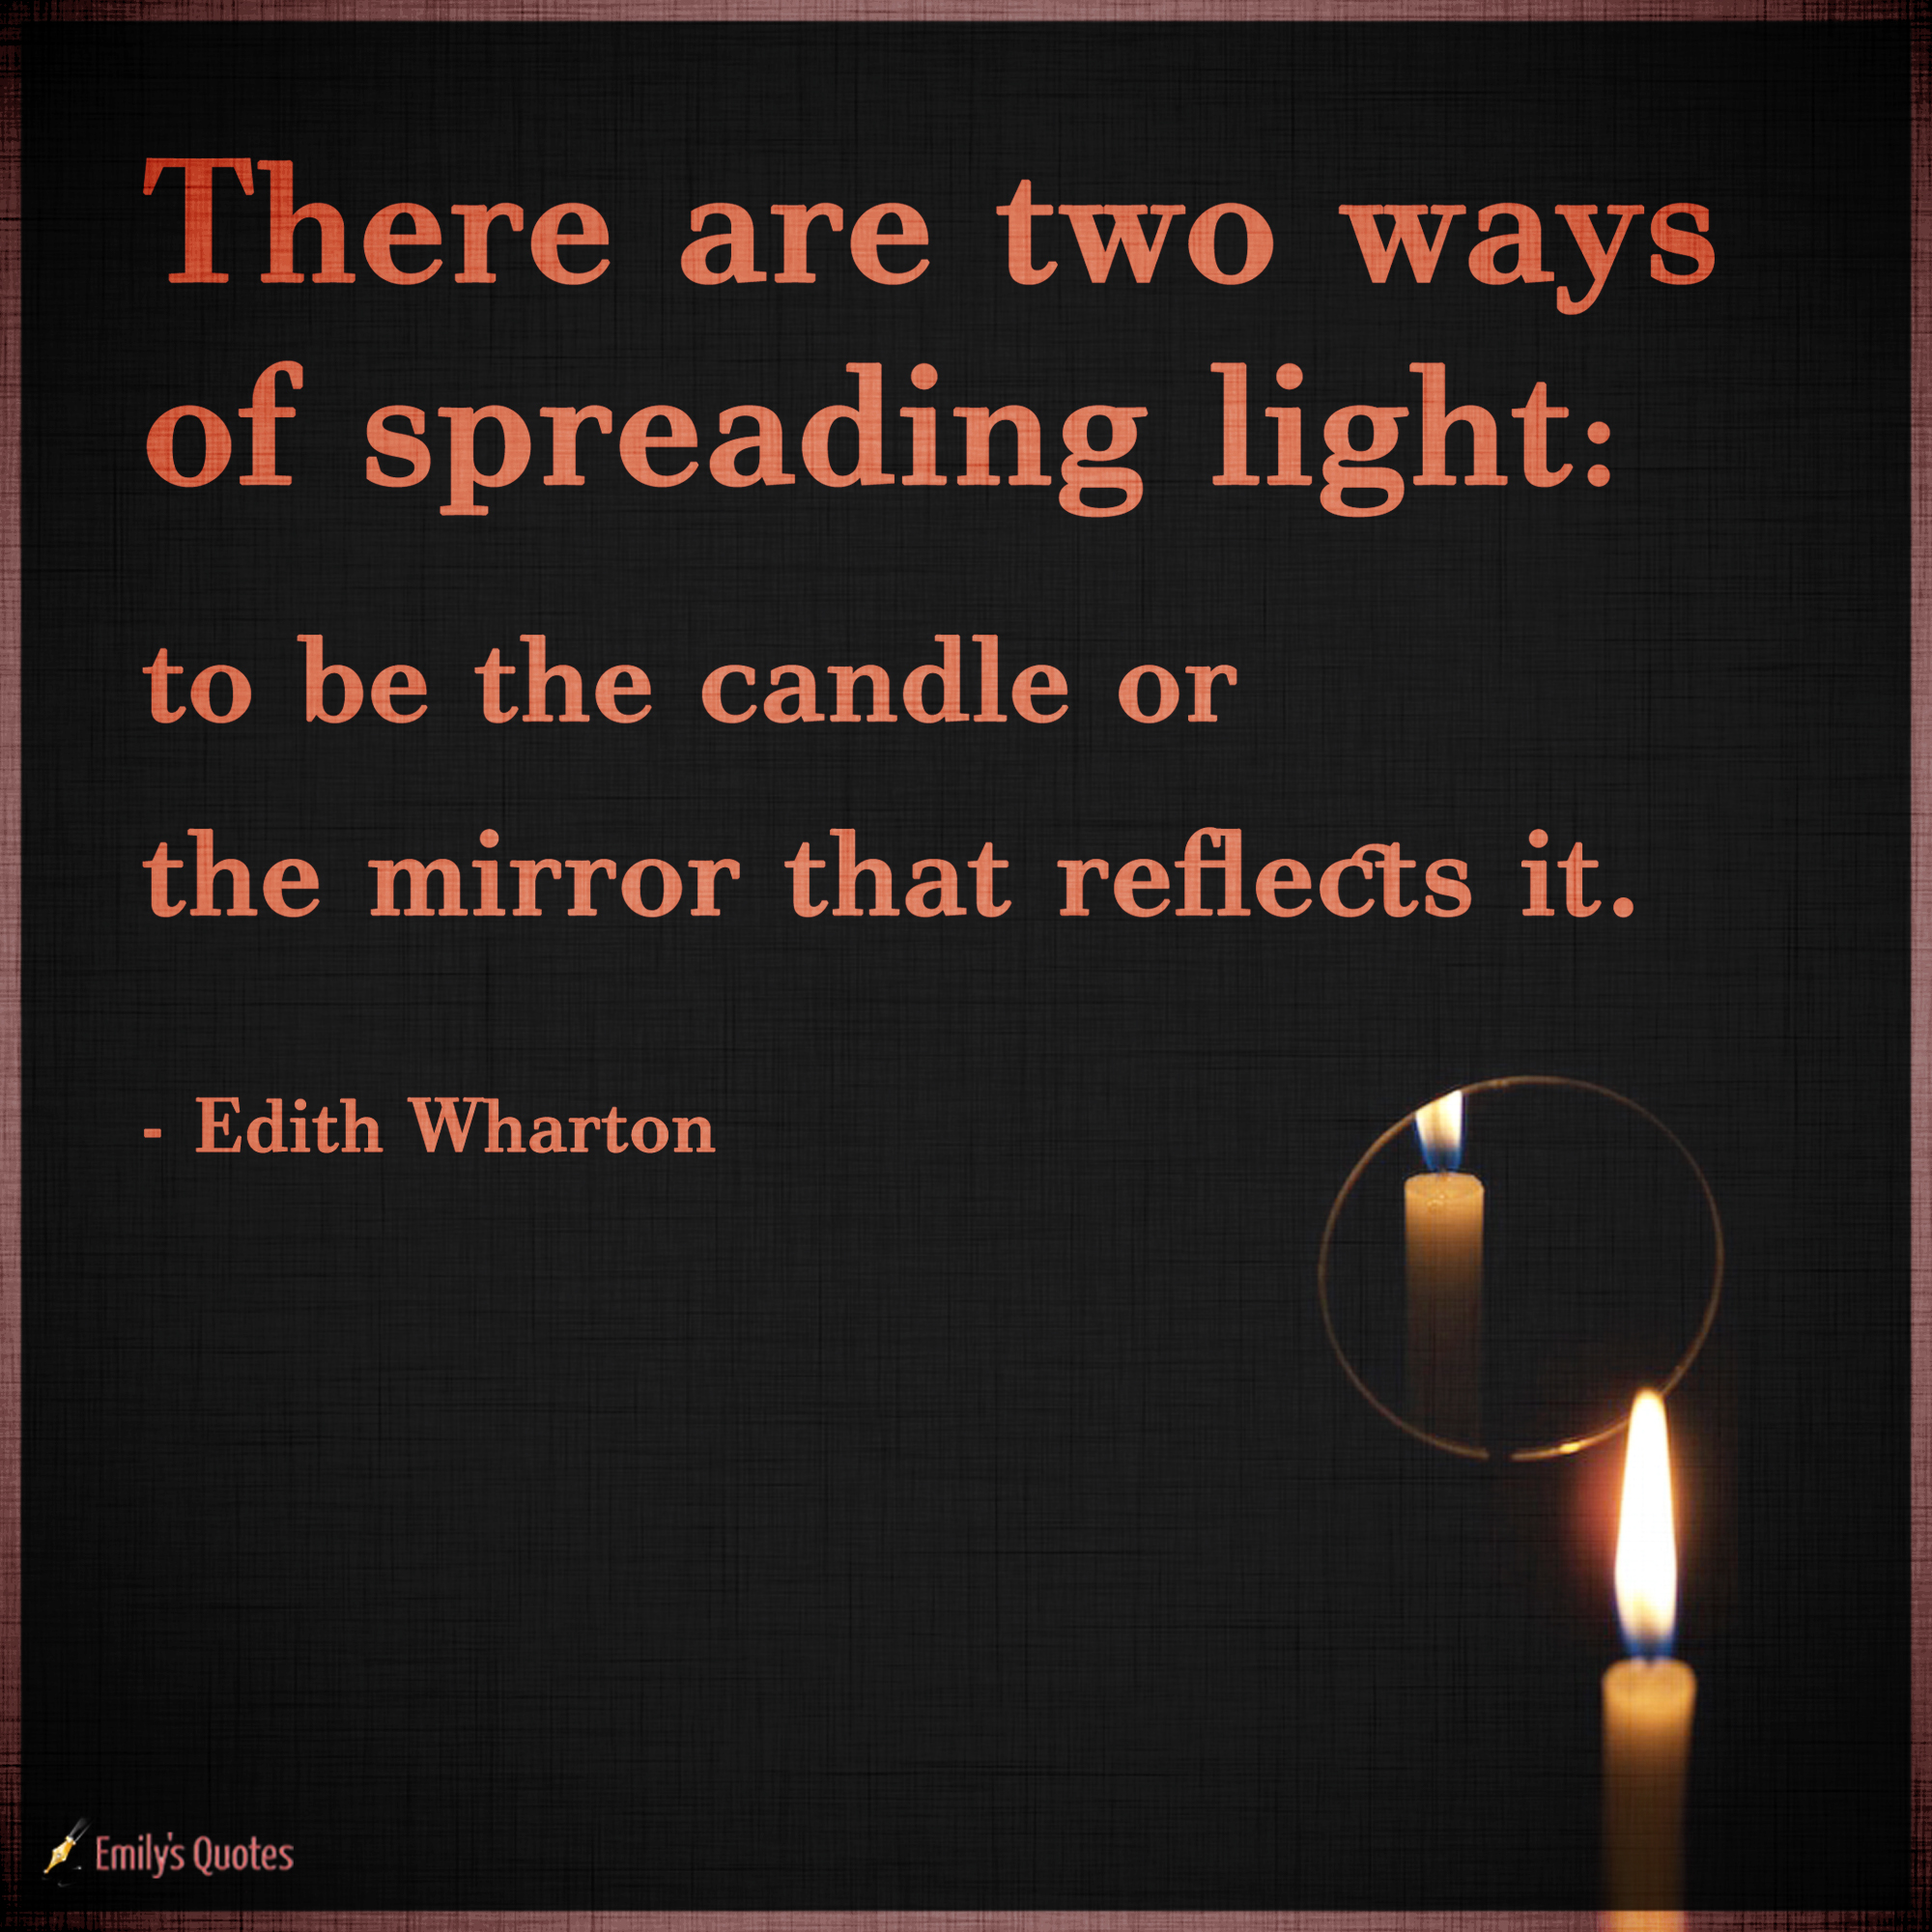 There are two ways of spreading light to be the candle